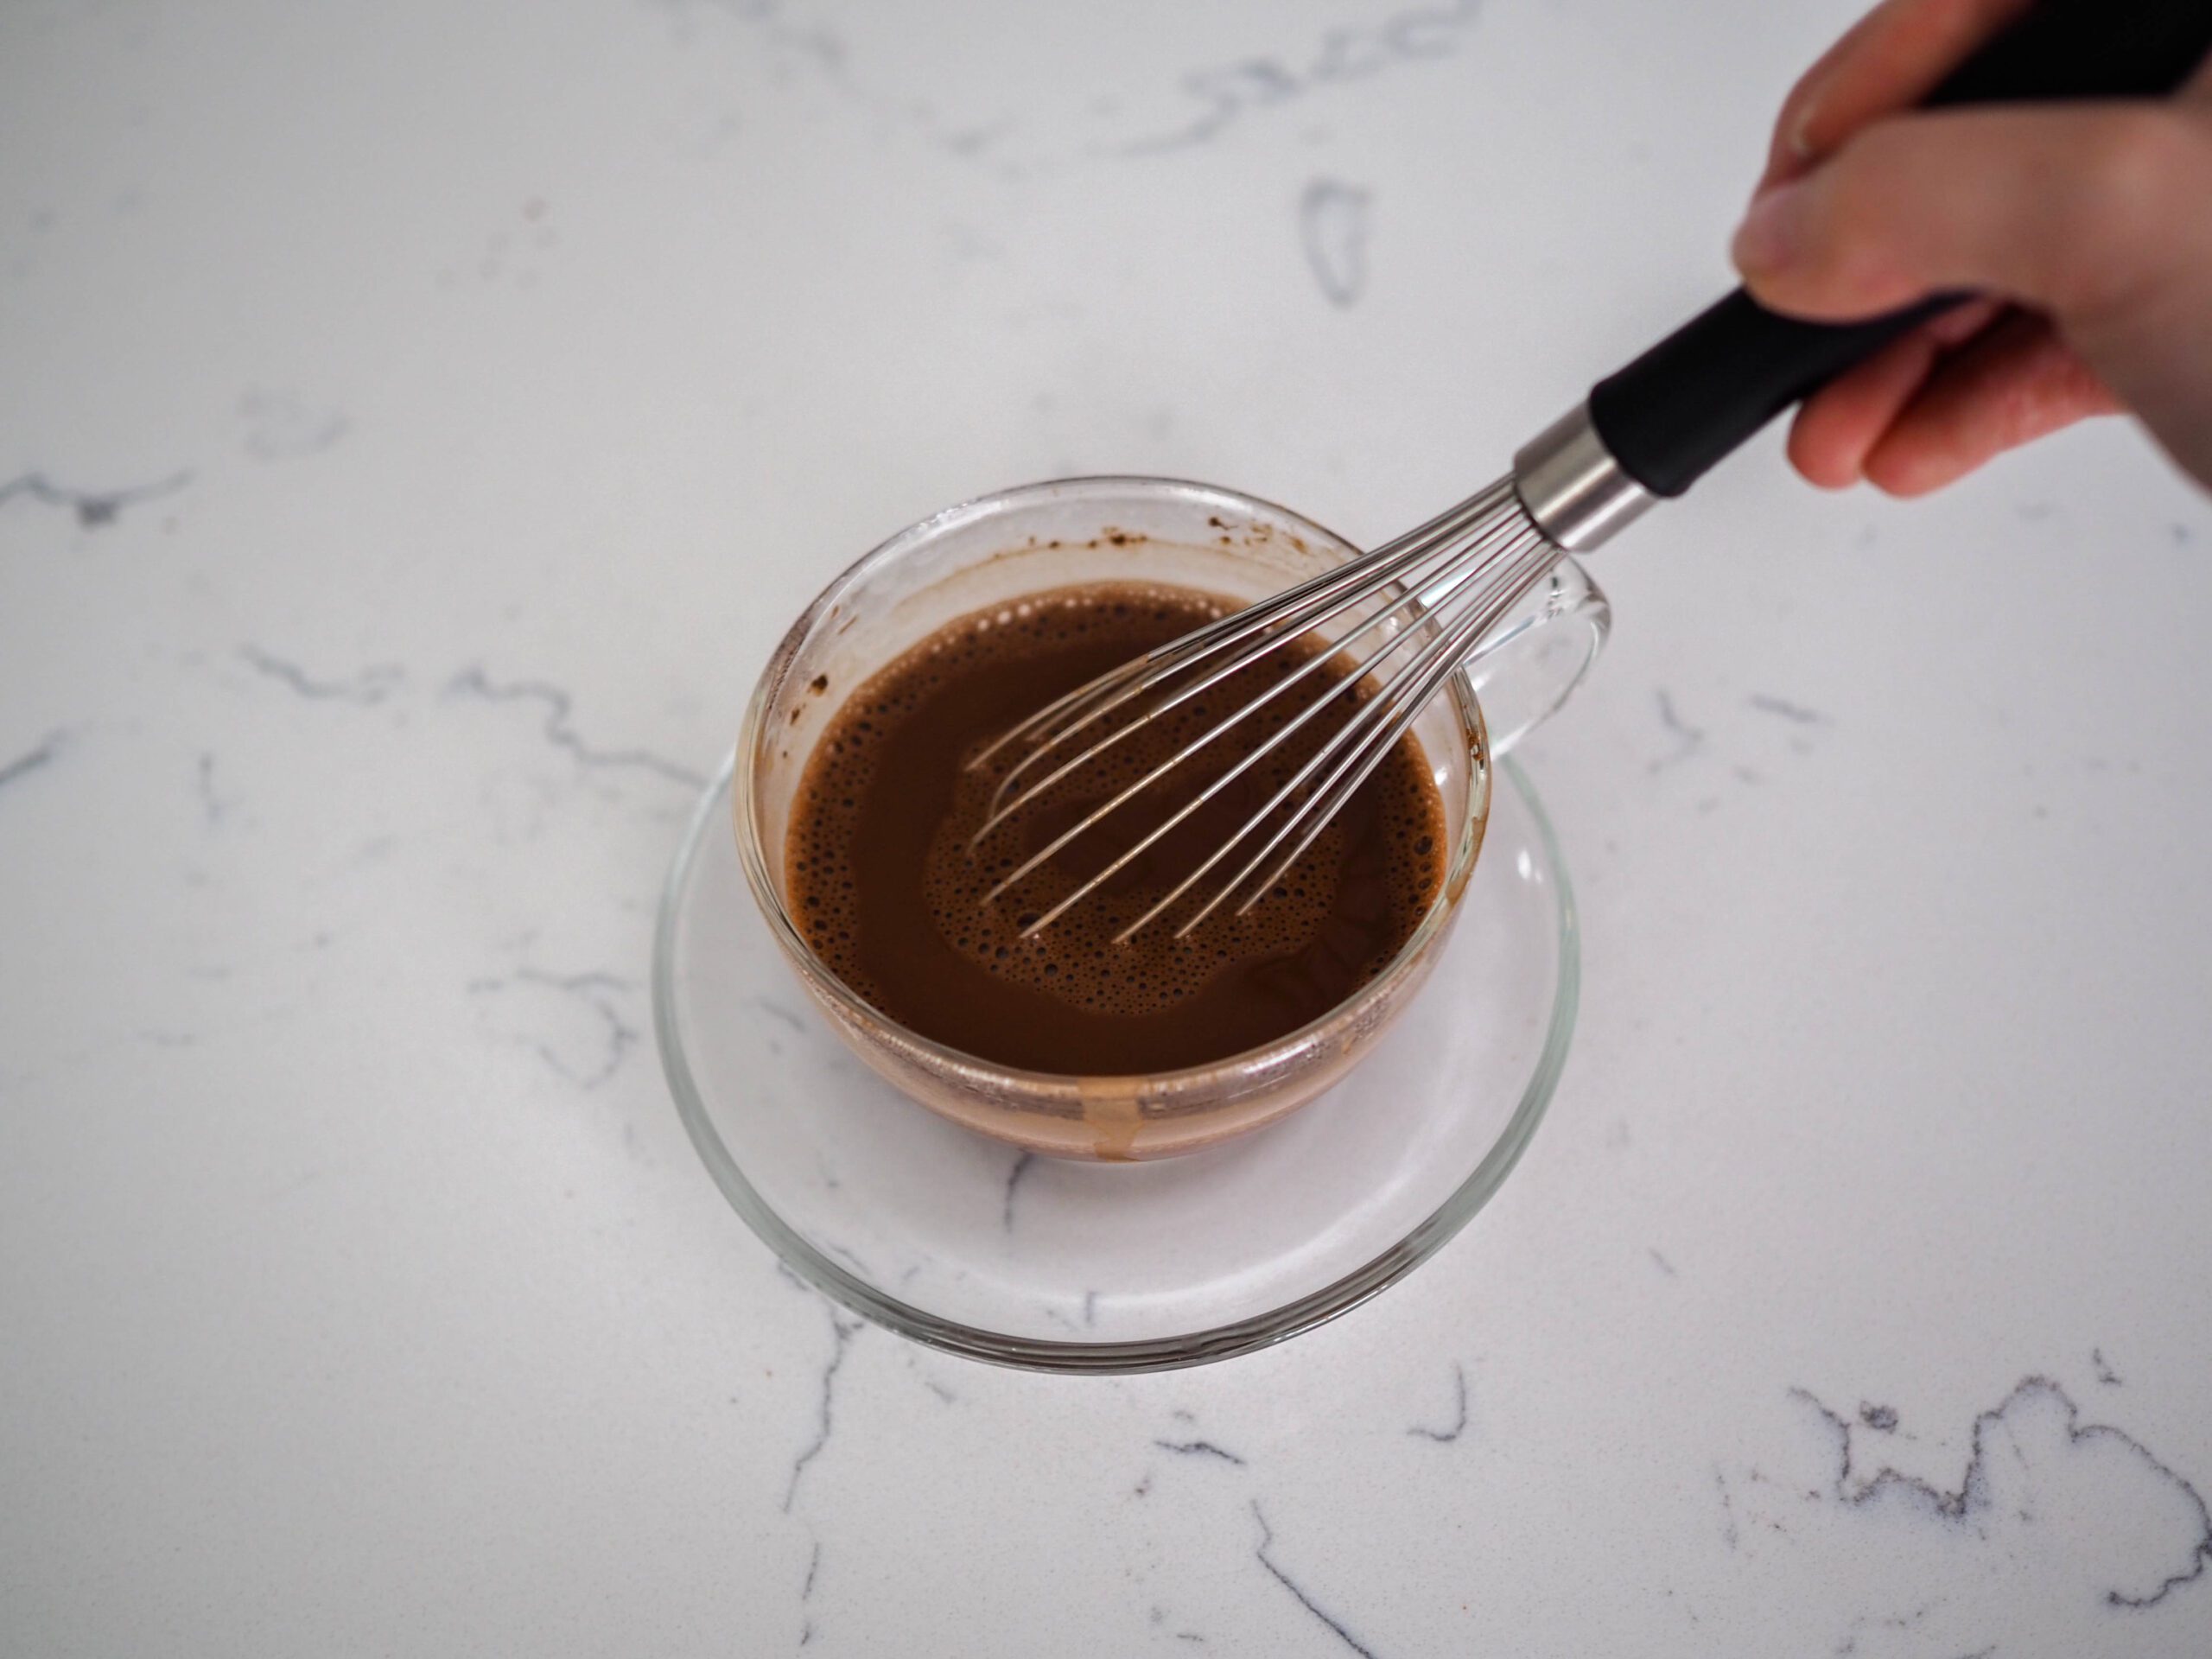 A whisk is resting in a clear tea cup filled with bloomed cocoa powder.